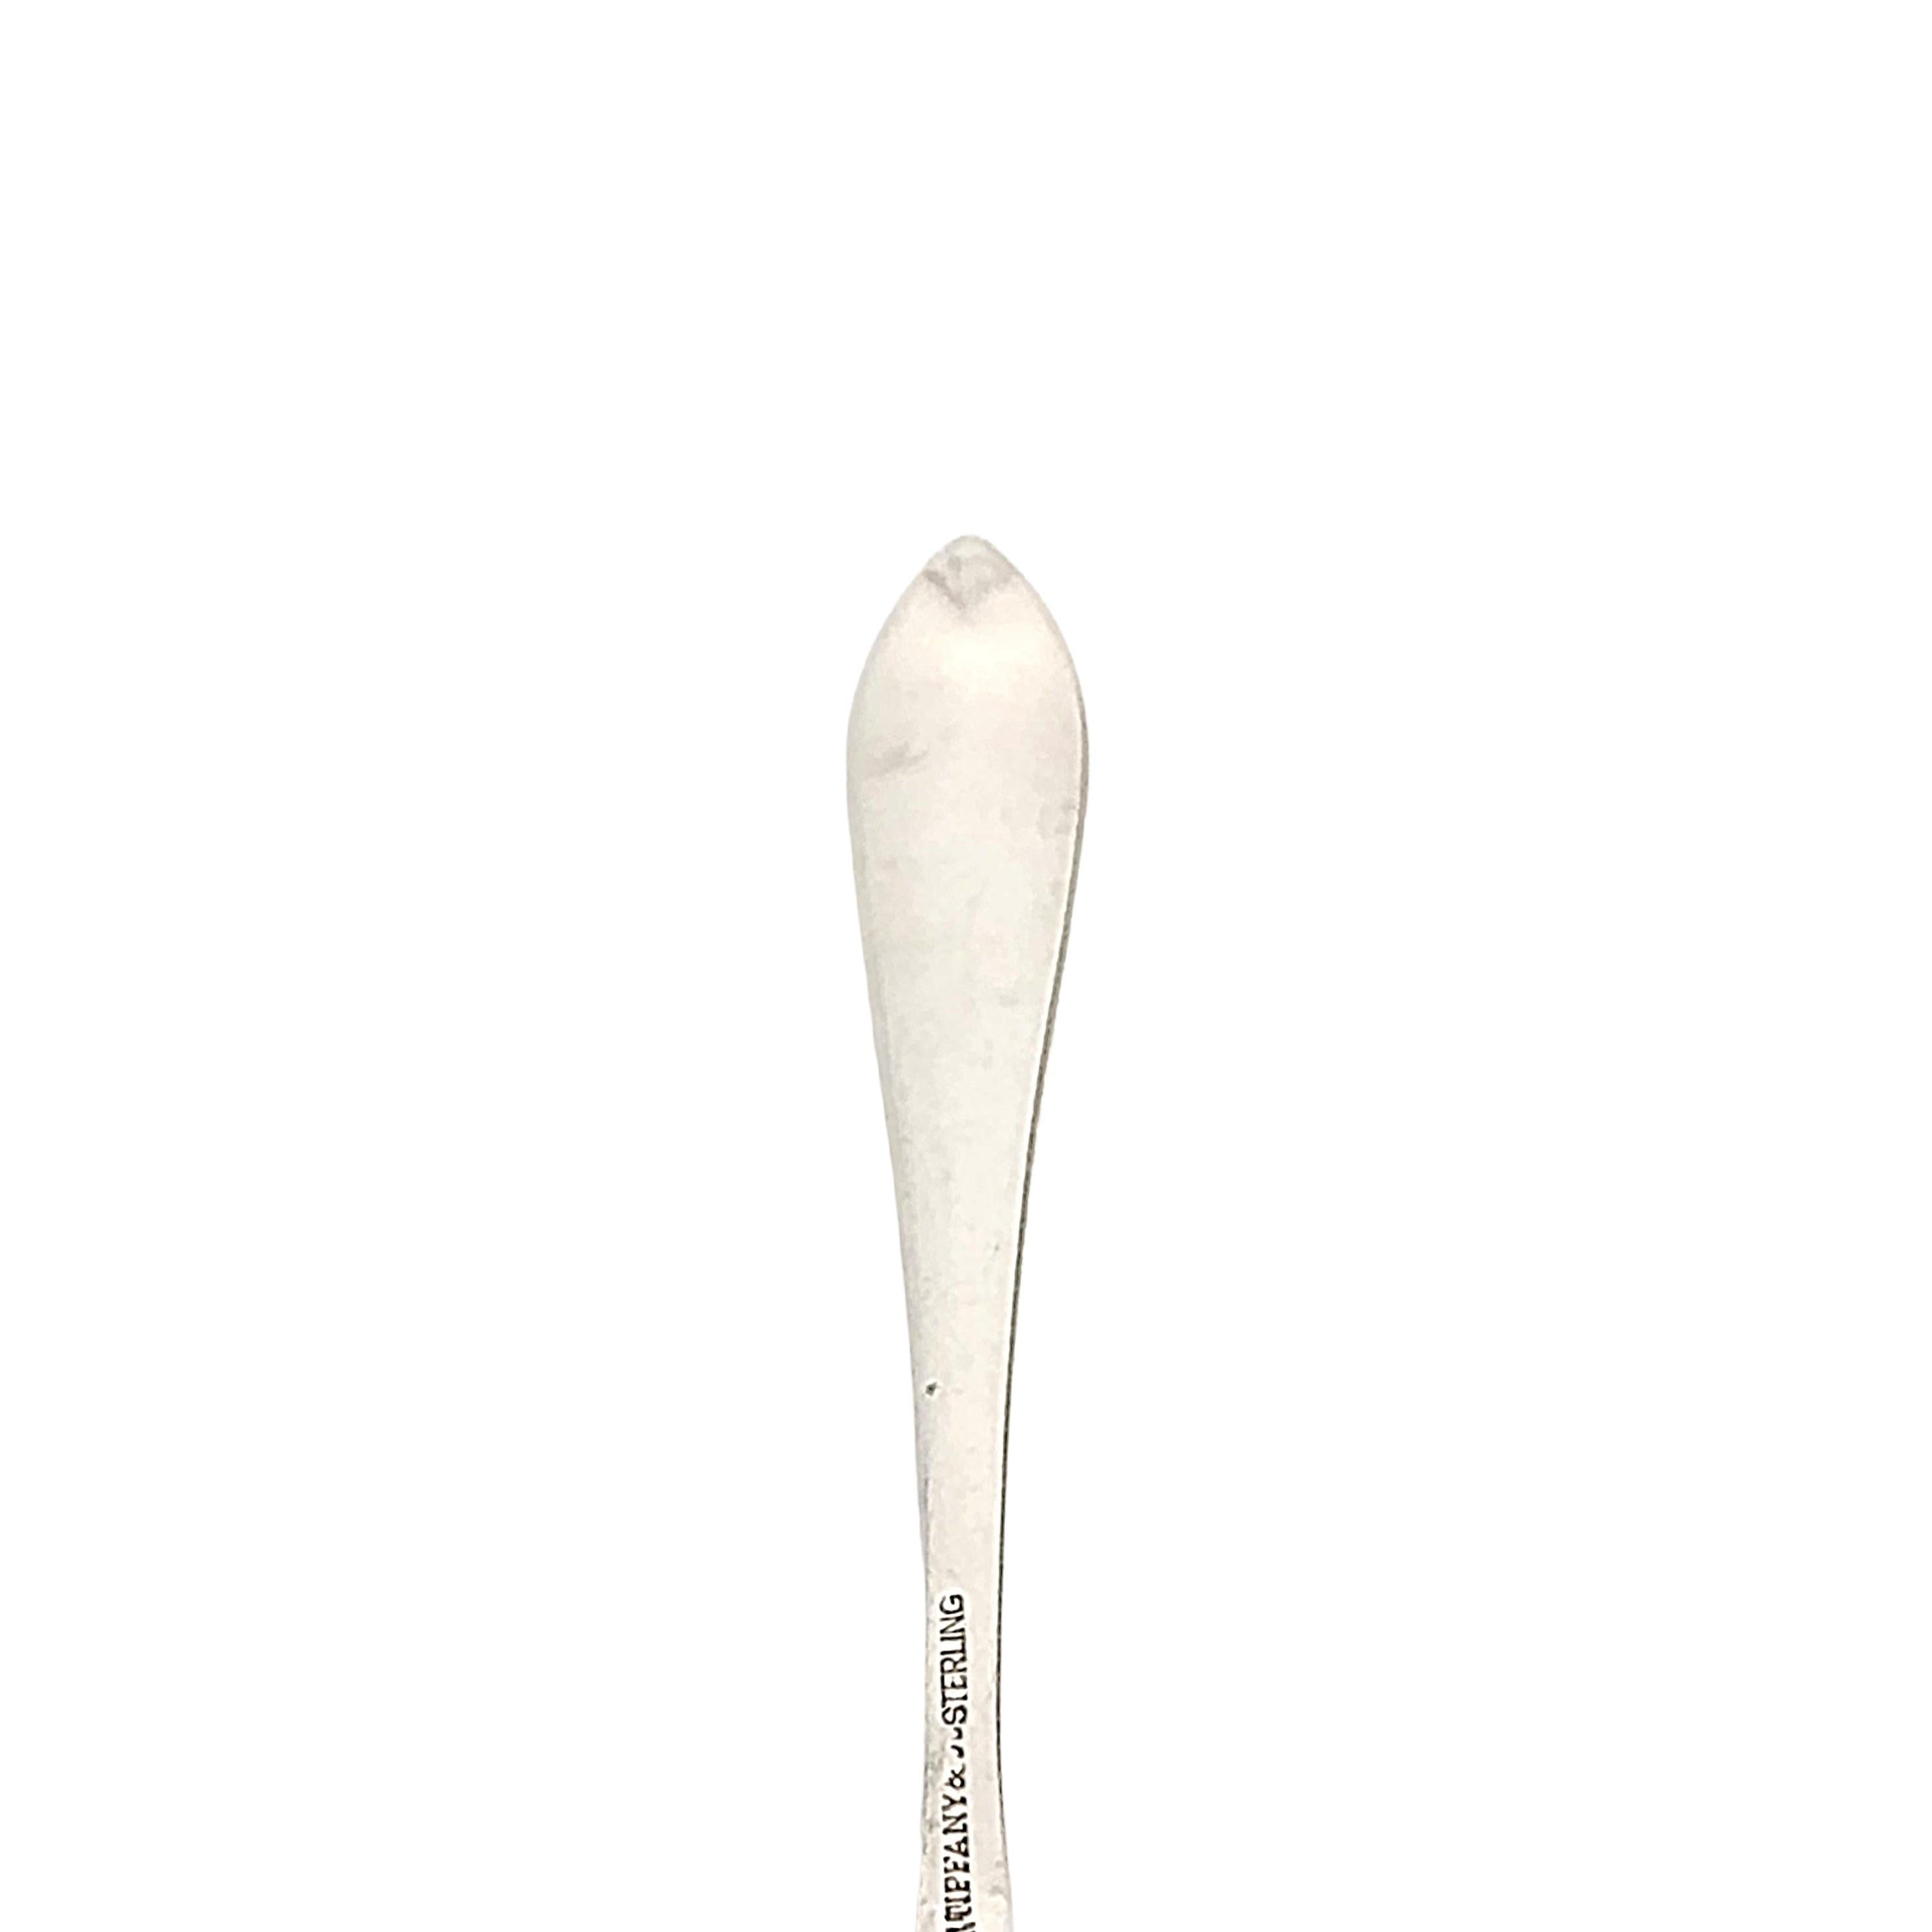 Tiffany & Co Faneuil Sterling Silver Demitasse Spoon with Monogram #13070 For Sale 2